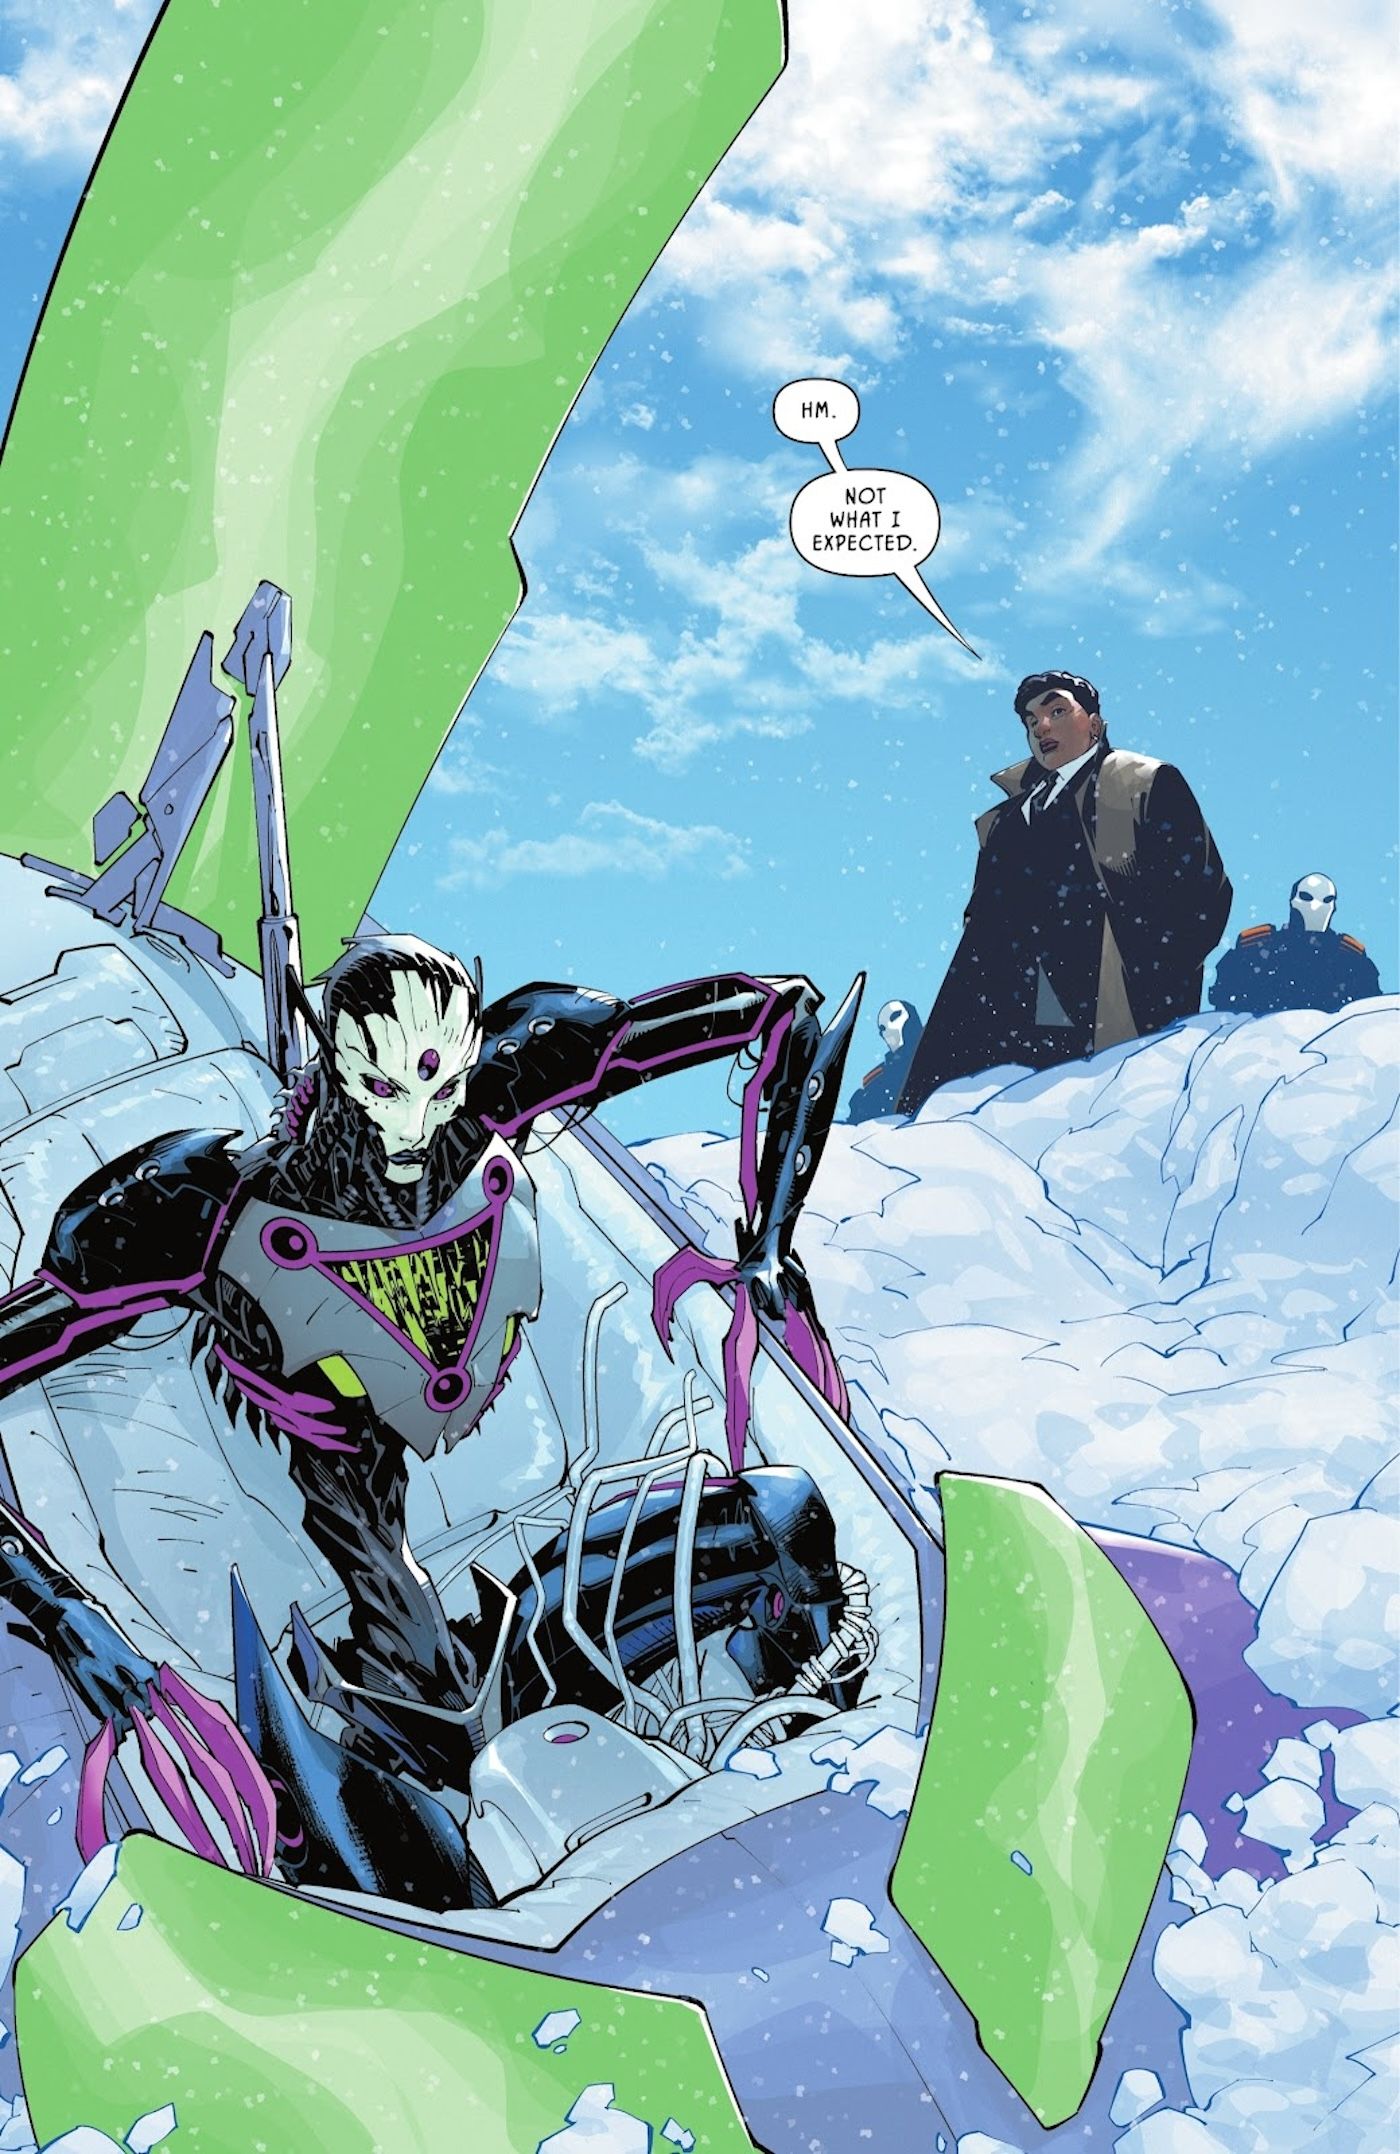 Comic book page: Brainiac Queen emerges from a crashed escape pod in the snow. Amanda Waller watches from above.